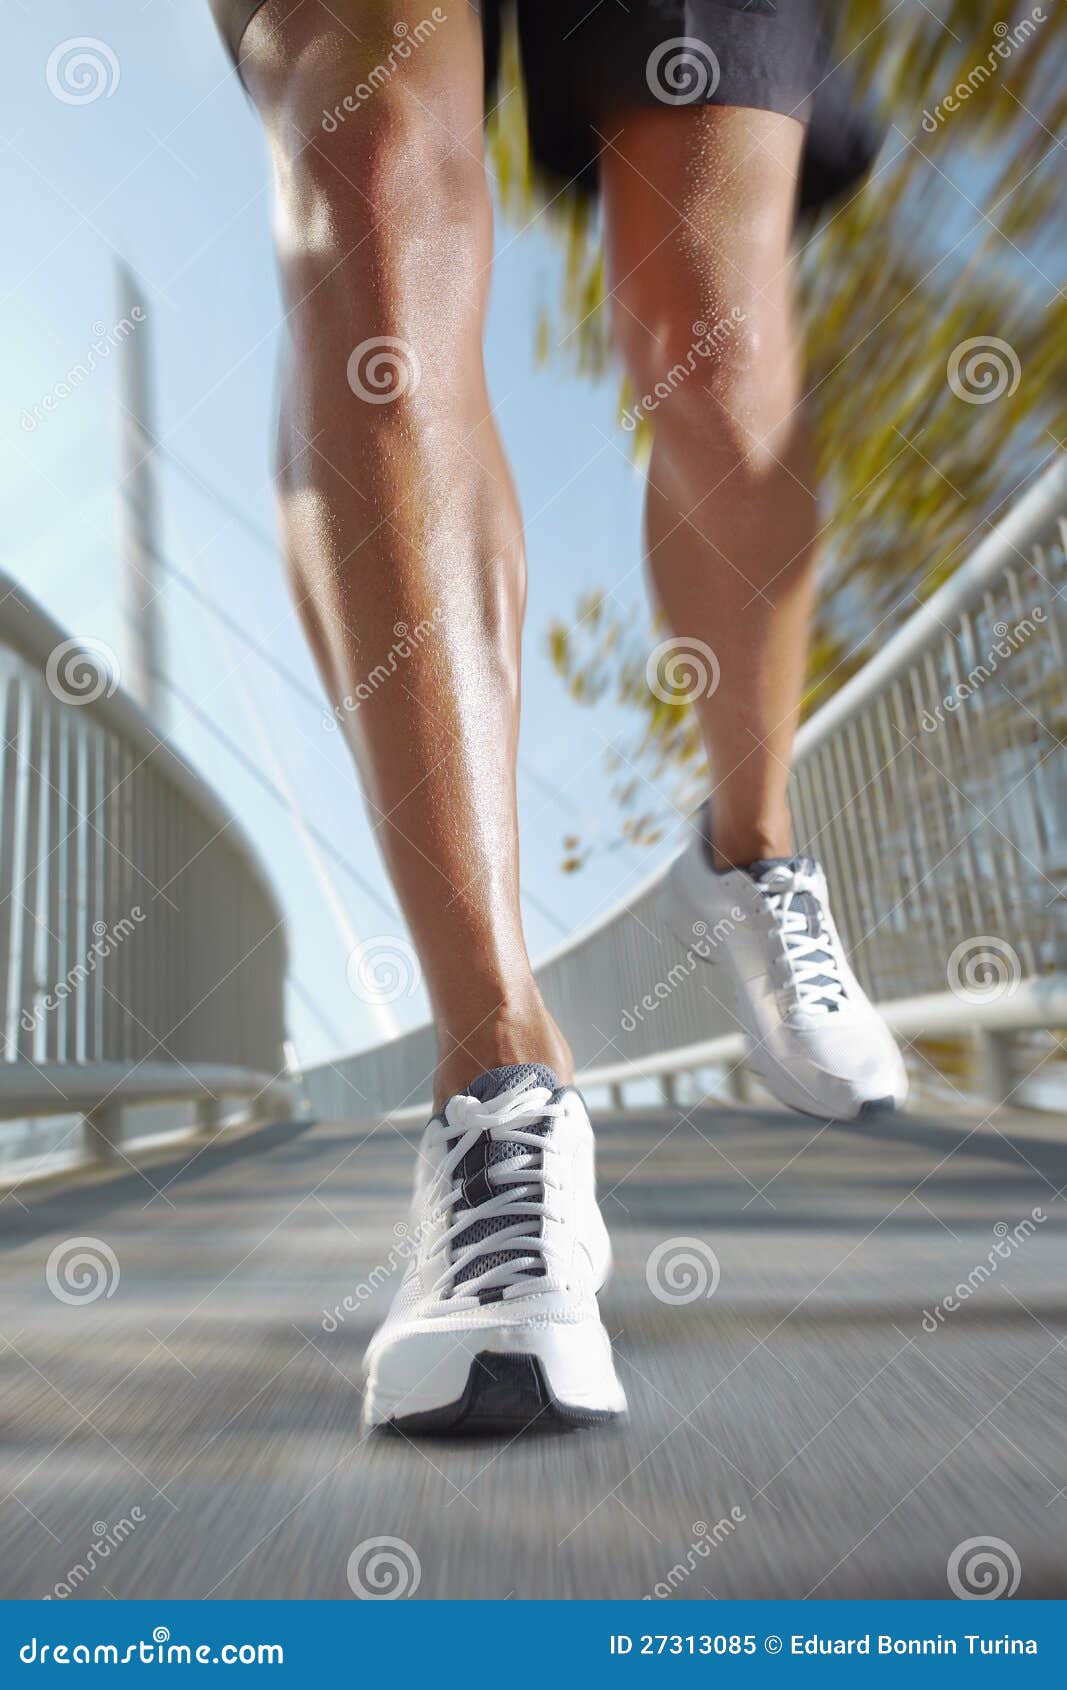 234,607 Running Background Stock Photos - Free & Royalty-Free Stock Photos  from Dreamstime